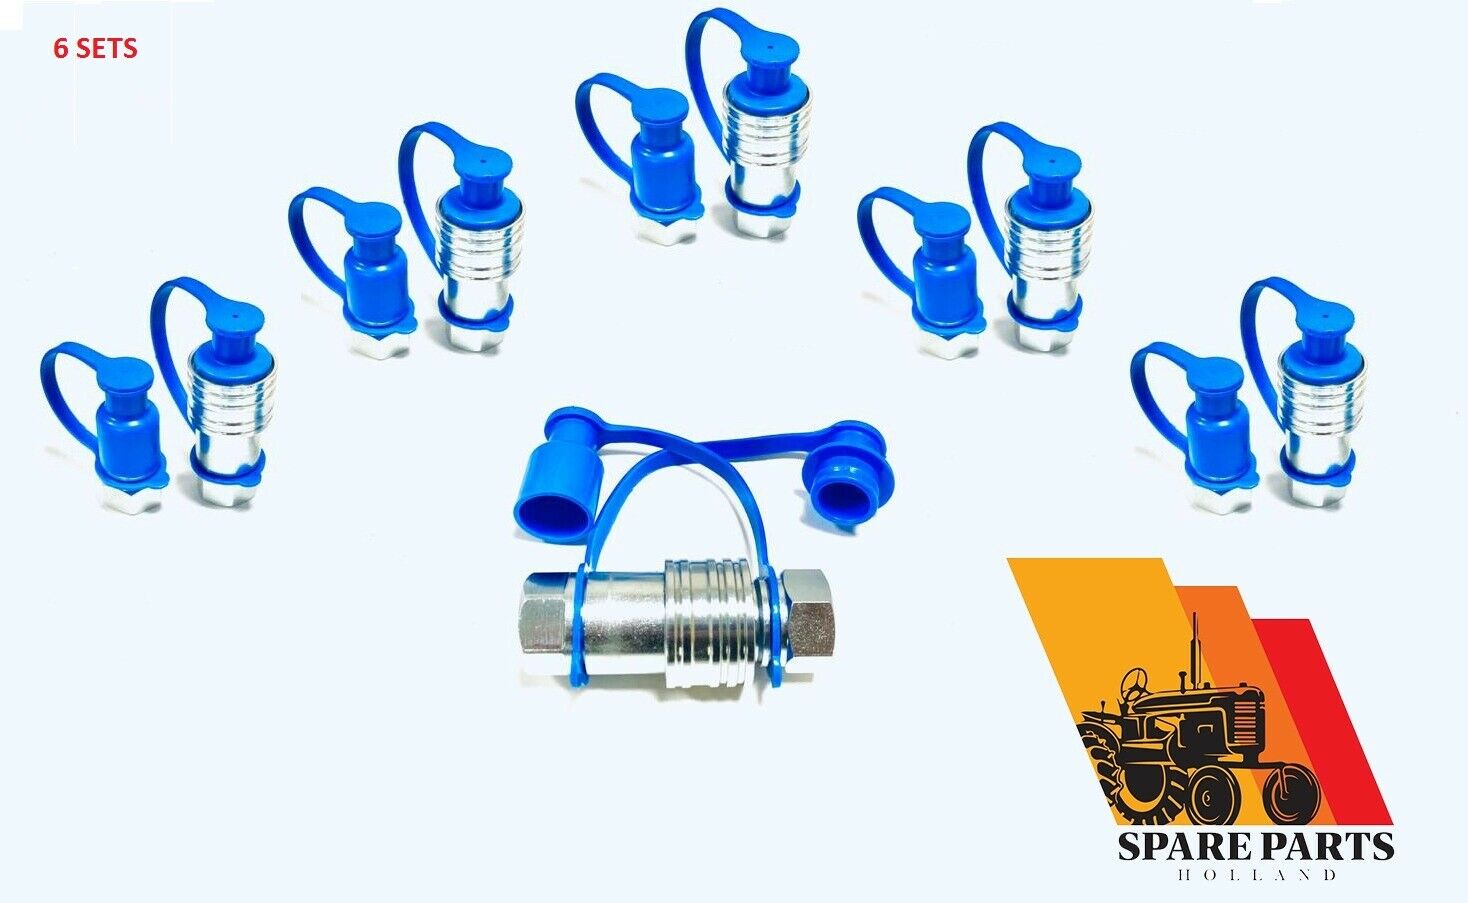 1/2″ NPT Hydraulic Quick Connect Couplings – Poppet Pioneer Style – 6 Sets